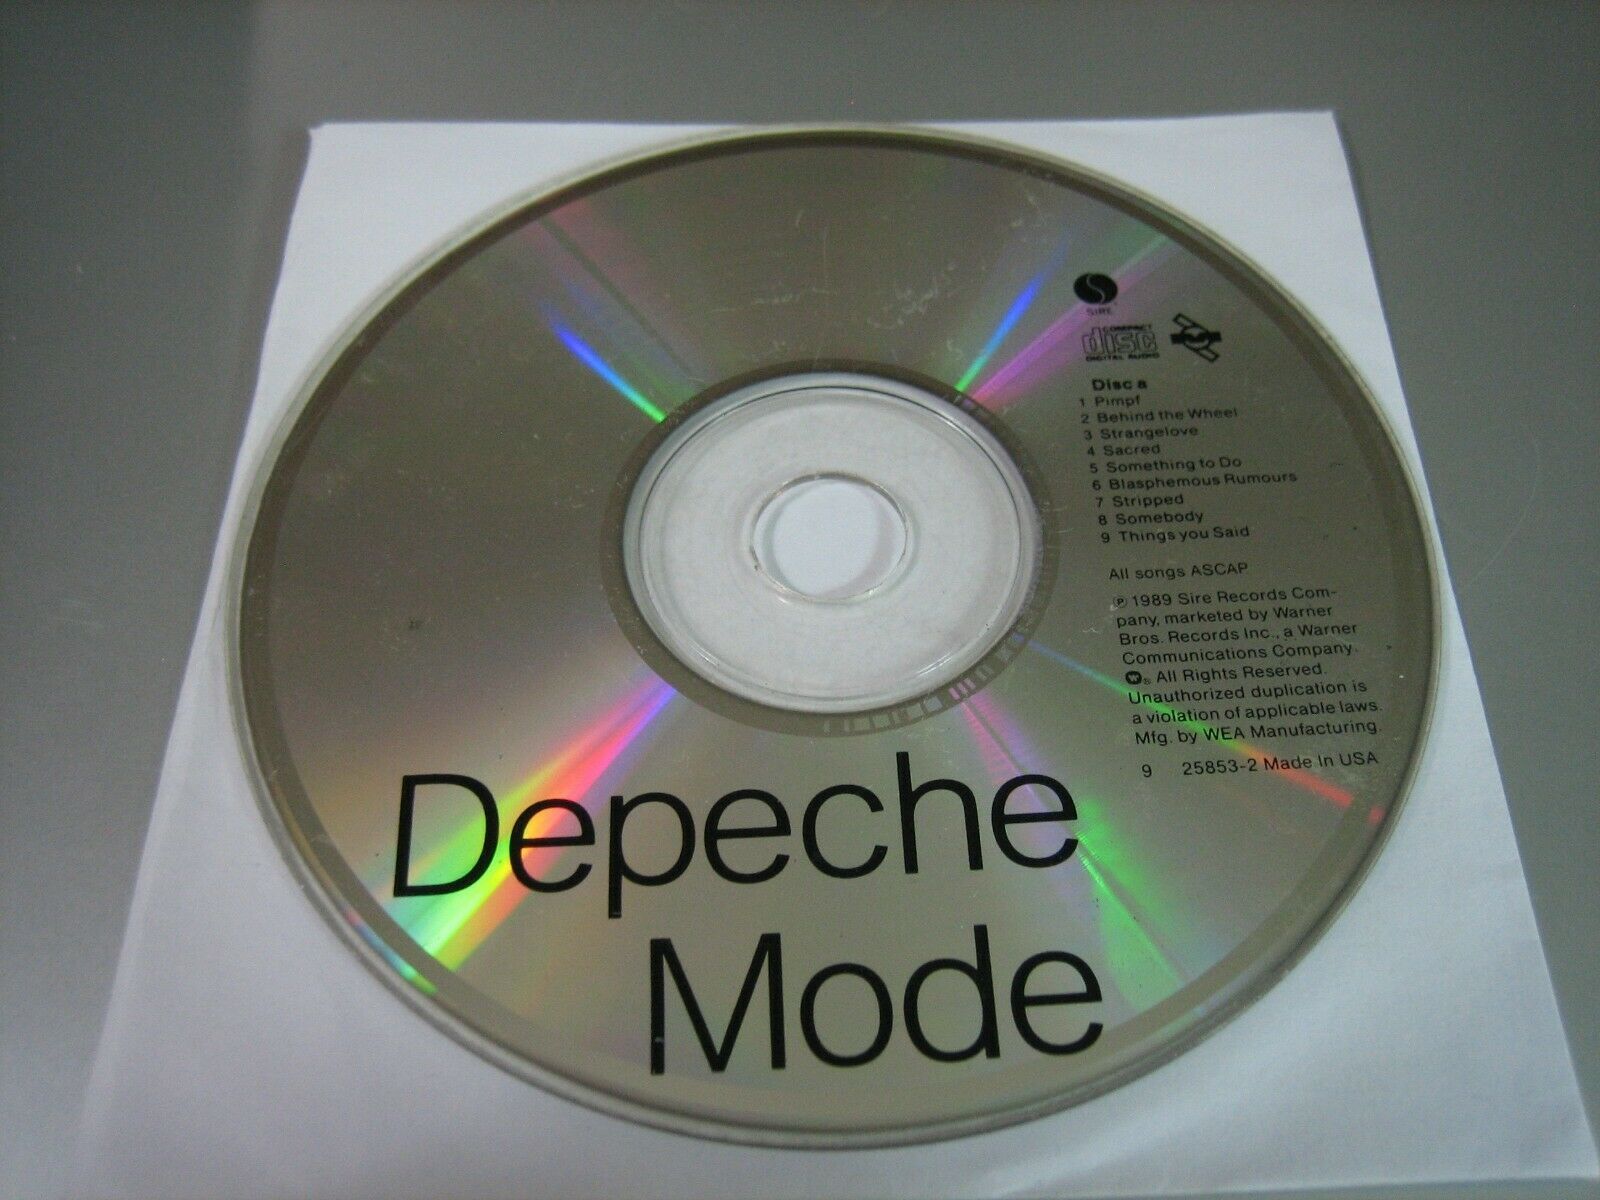 Primary image for 101 by Depeche Mode (CD, Mar-1989) - Disc 1 Only!!!